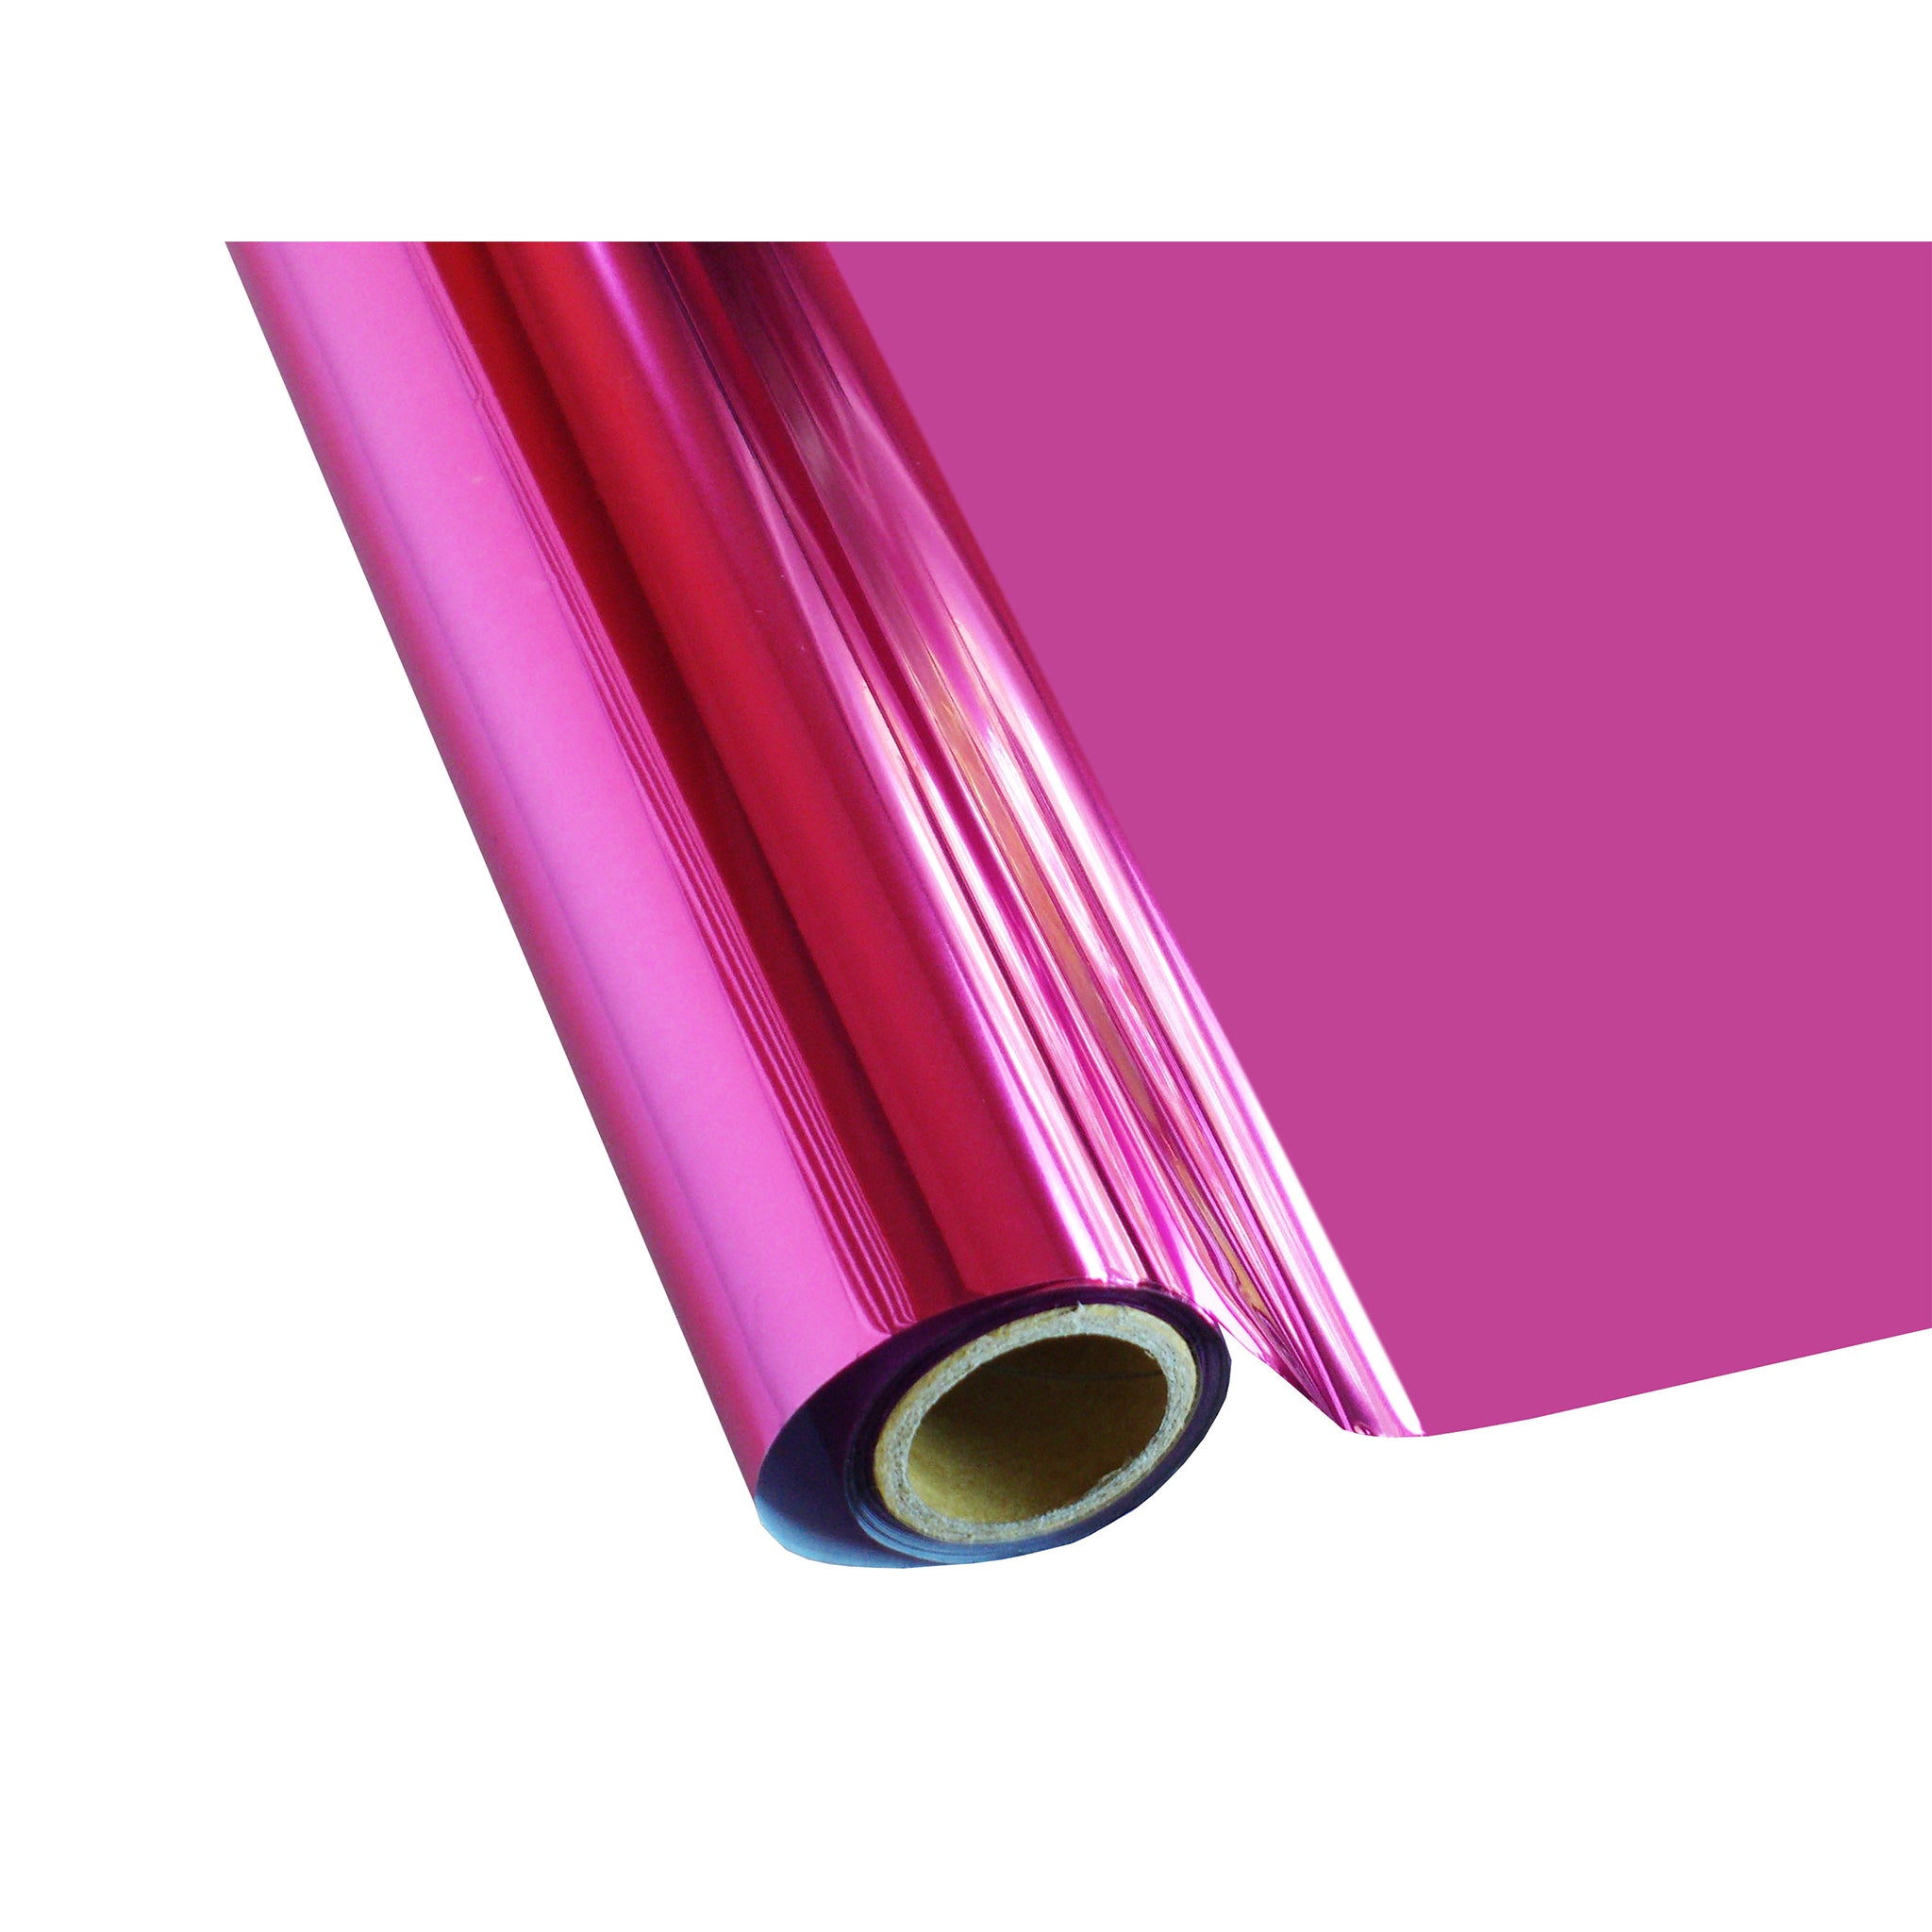 25 Foot Roll of 12" StarCraft Electra Foil - Hot Pink